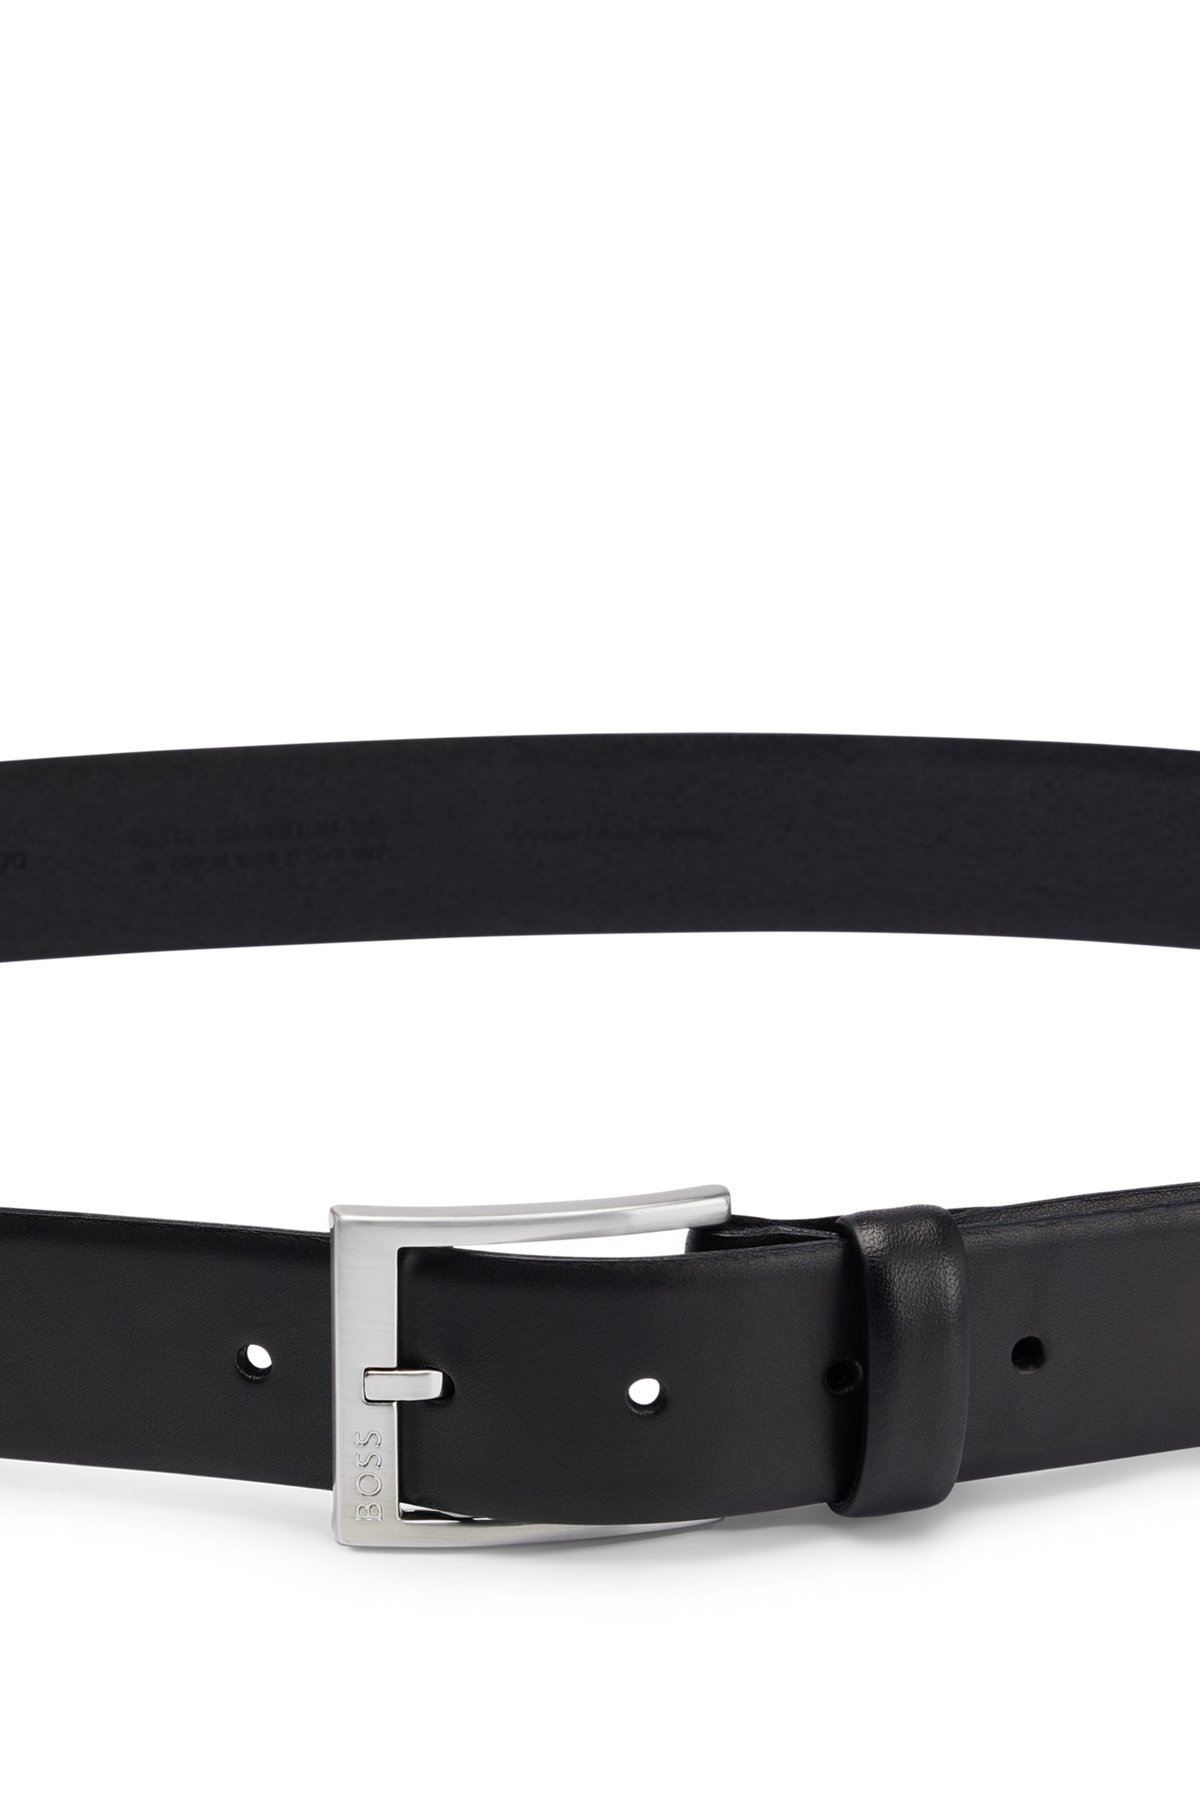 Italian-leather belt with silver-toned buckle, Black